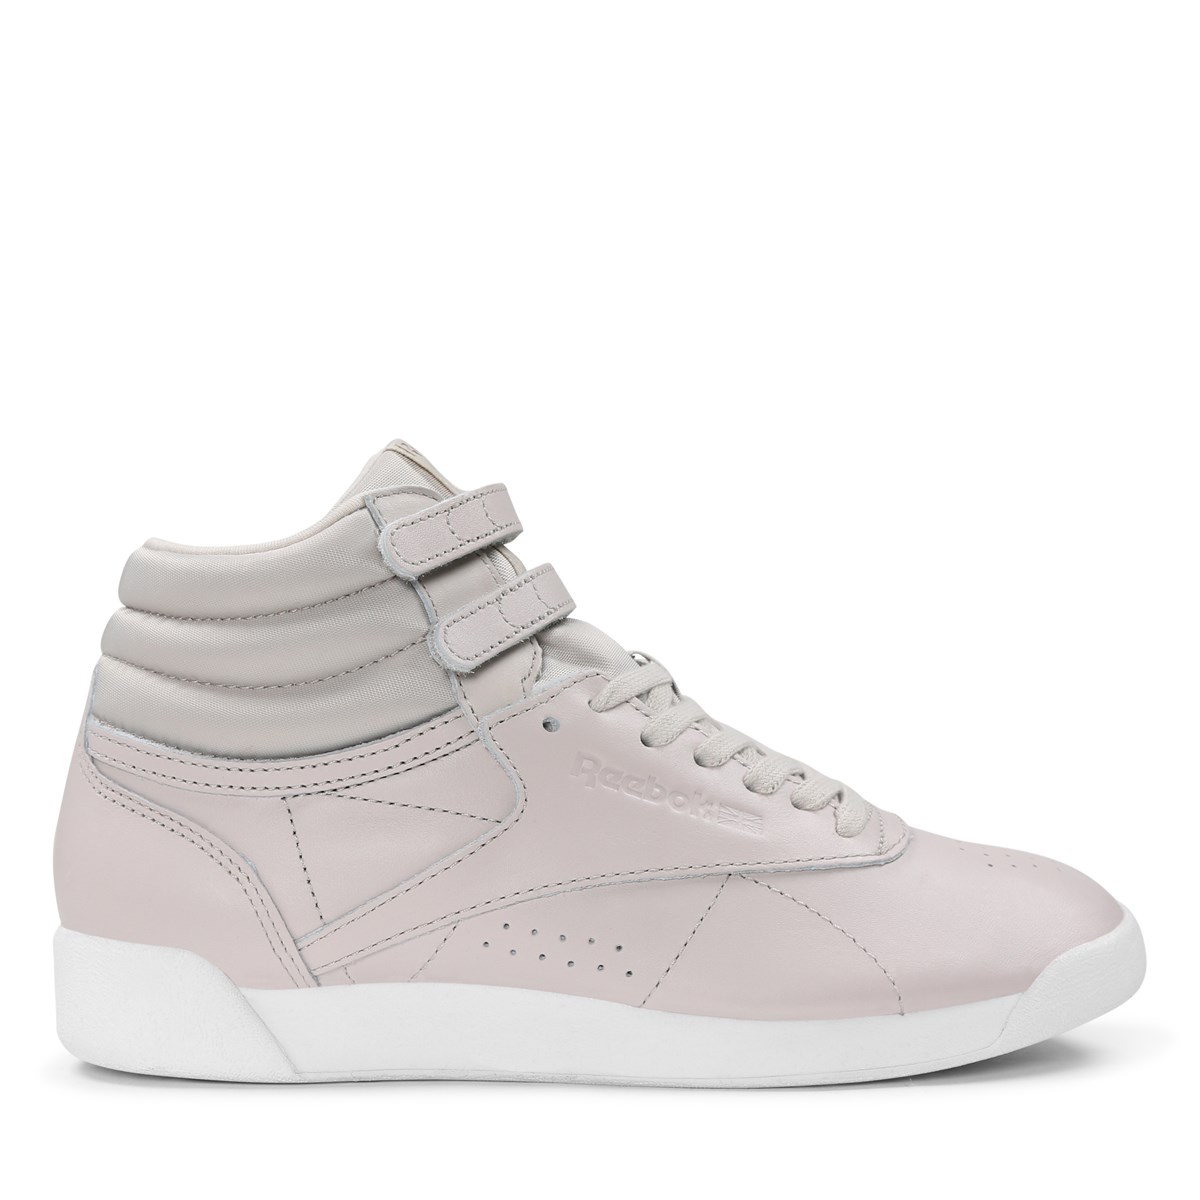 Freestyle HI Muted Sneakers in Light 